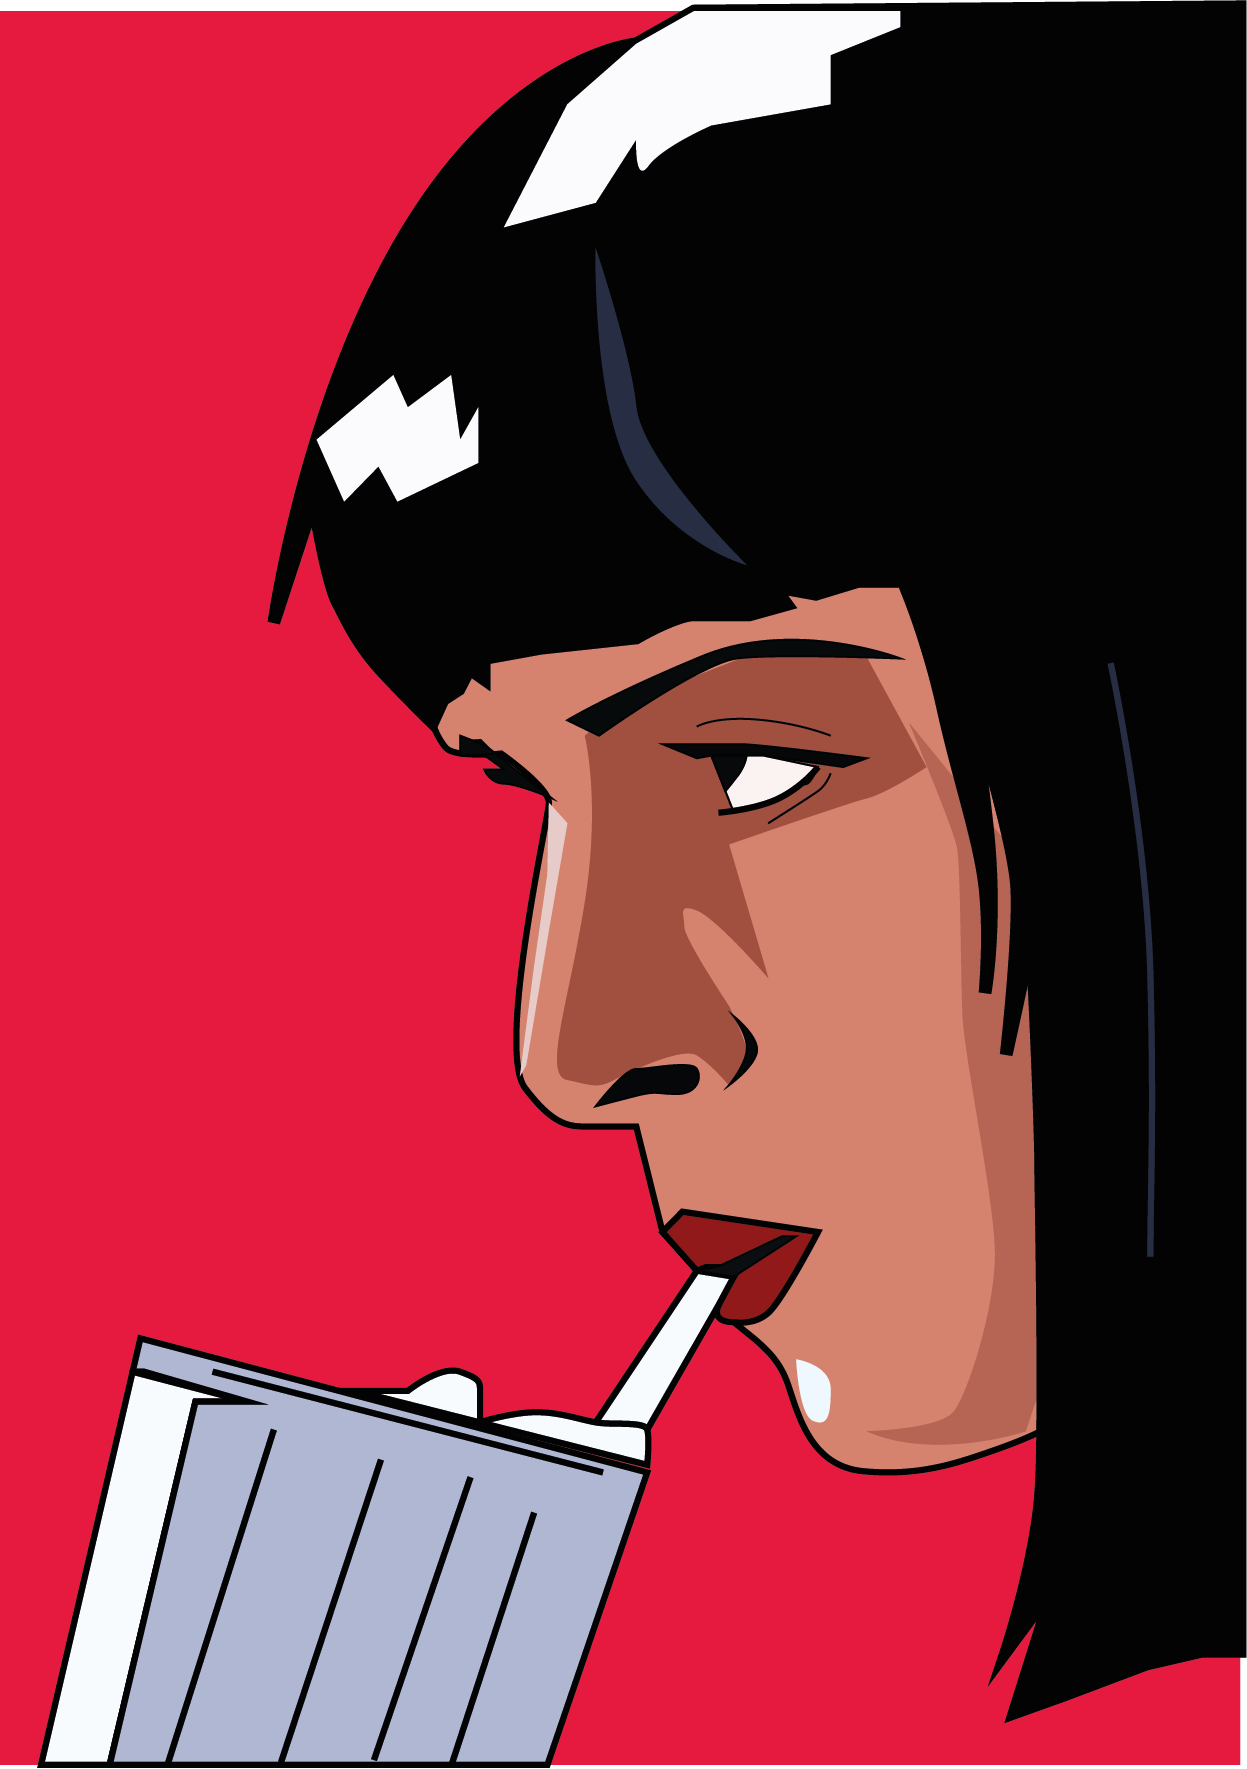 illustration from pulp fiction